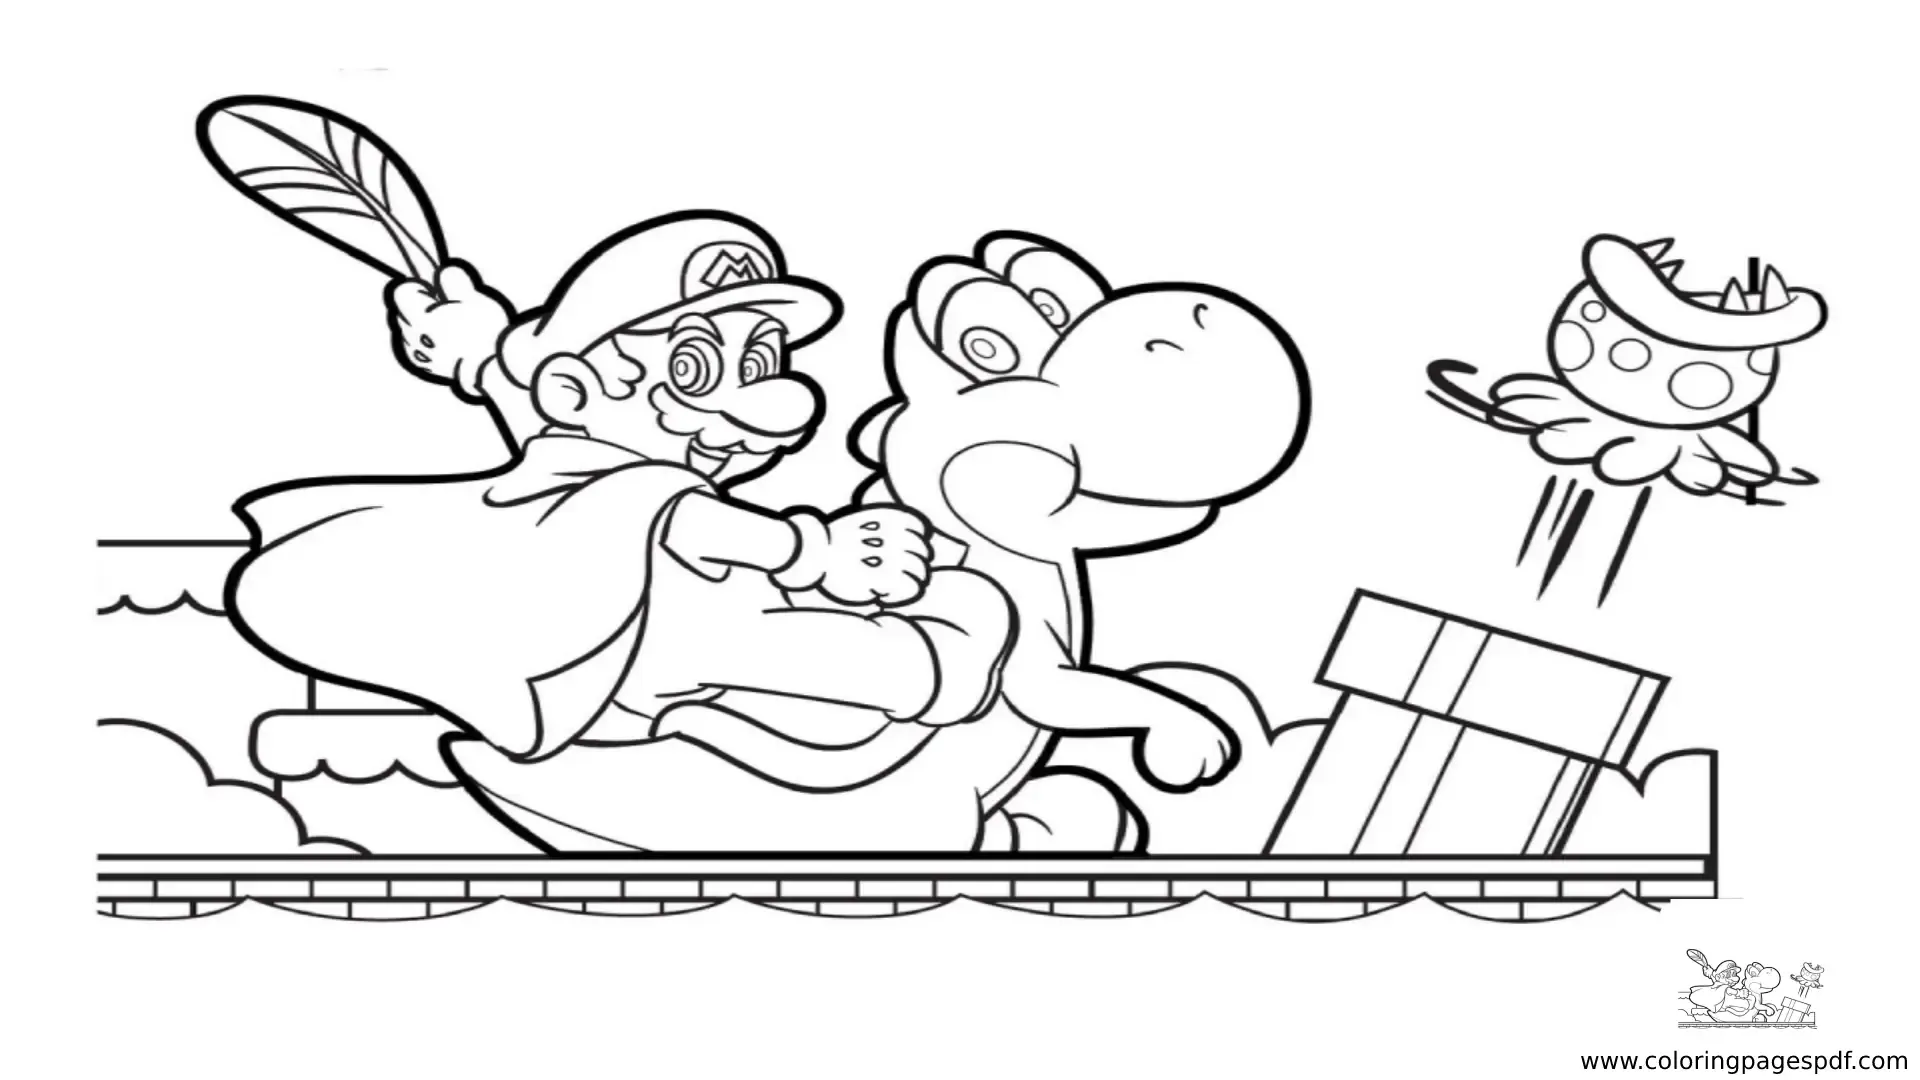 Coloring Pages Of Mario Riding On Yoshi